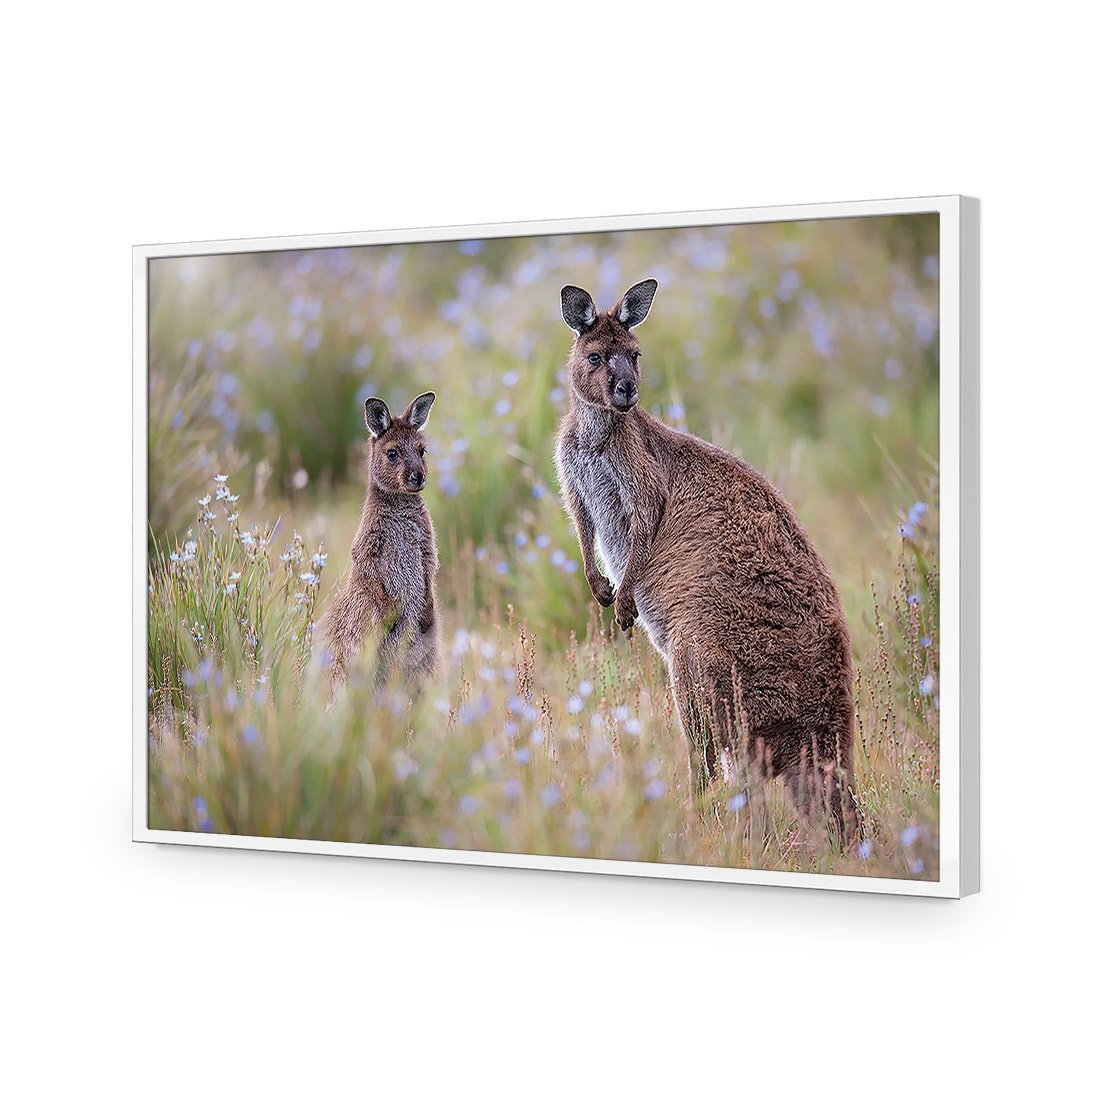 Where Are You By Peter Stahl - wallart-australia - Acrylic Glass No Border